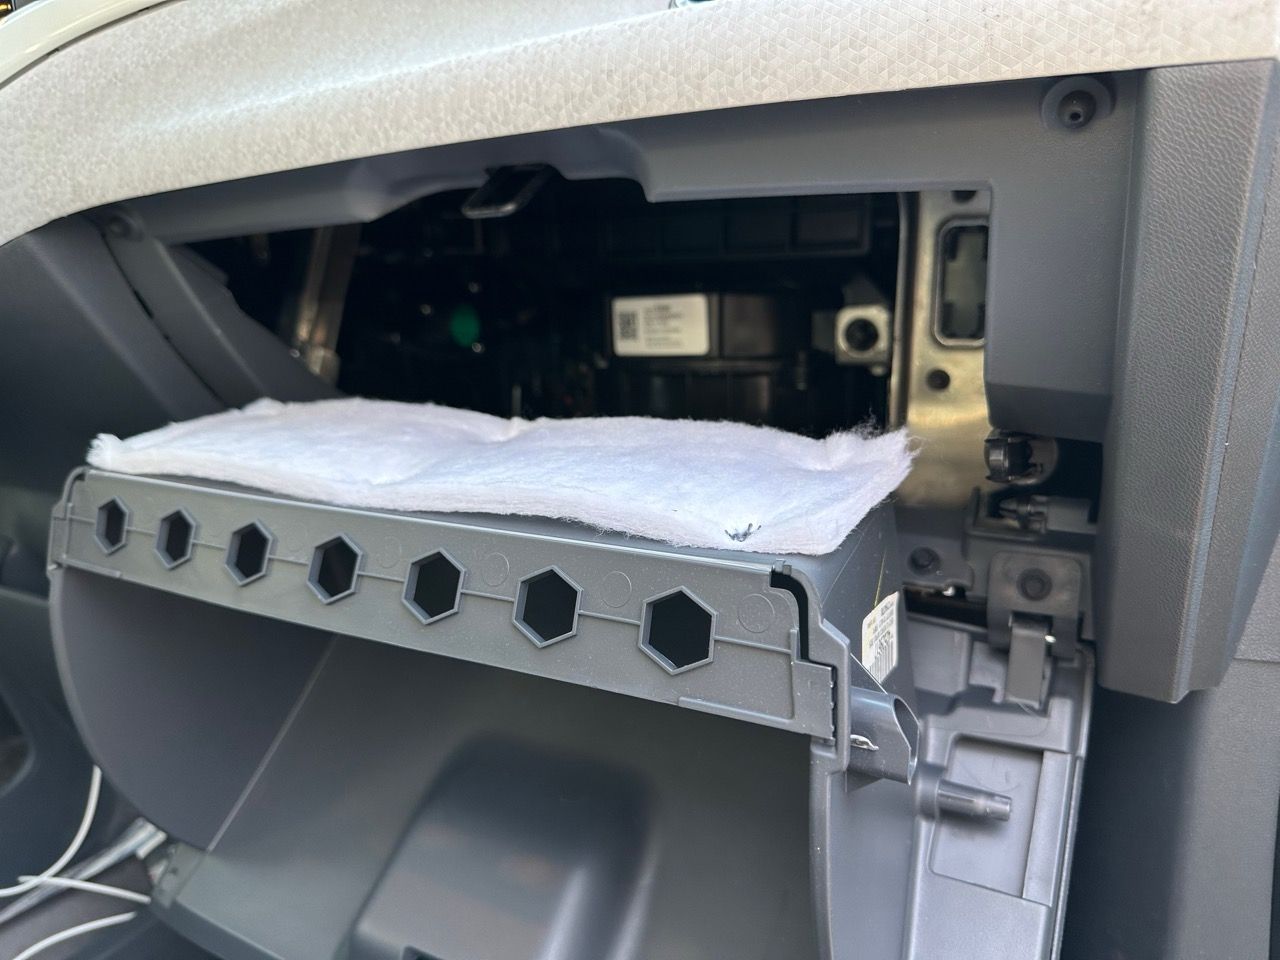 The glove box cavity. There is a white felt heat/noise isolation material on the back of the outside of the glove box.